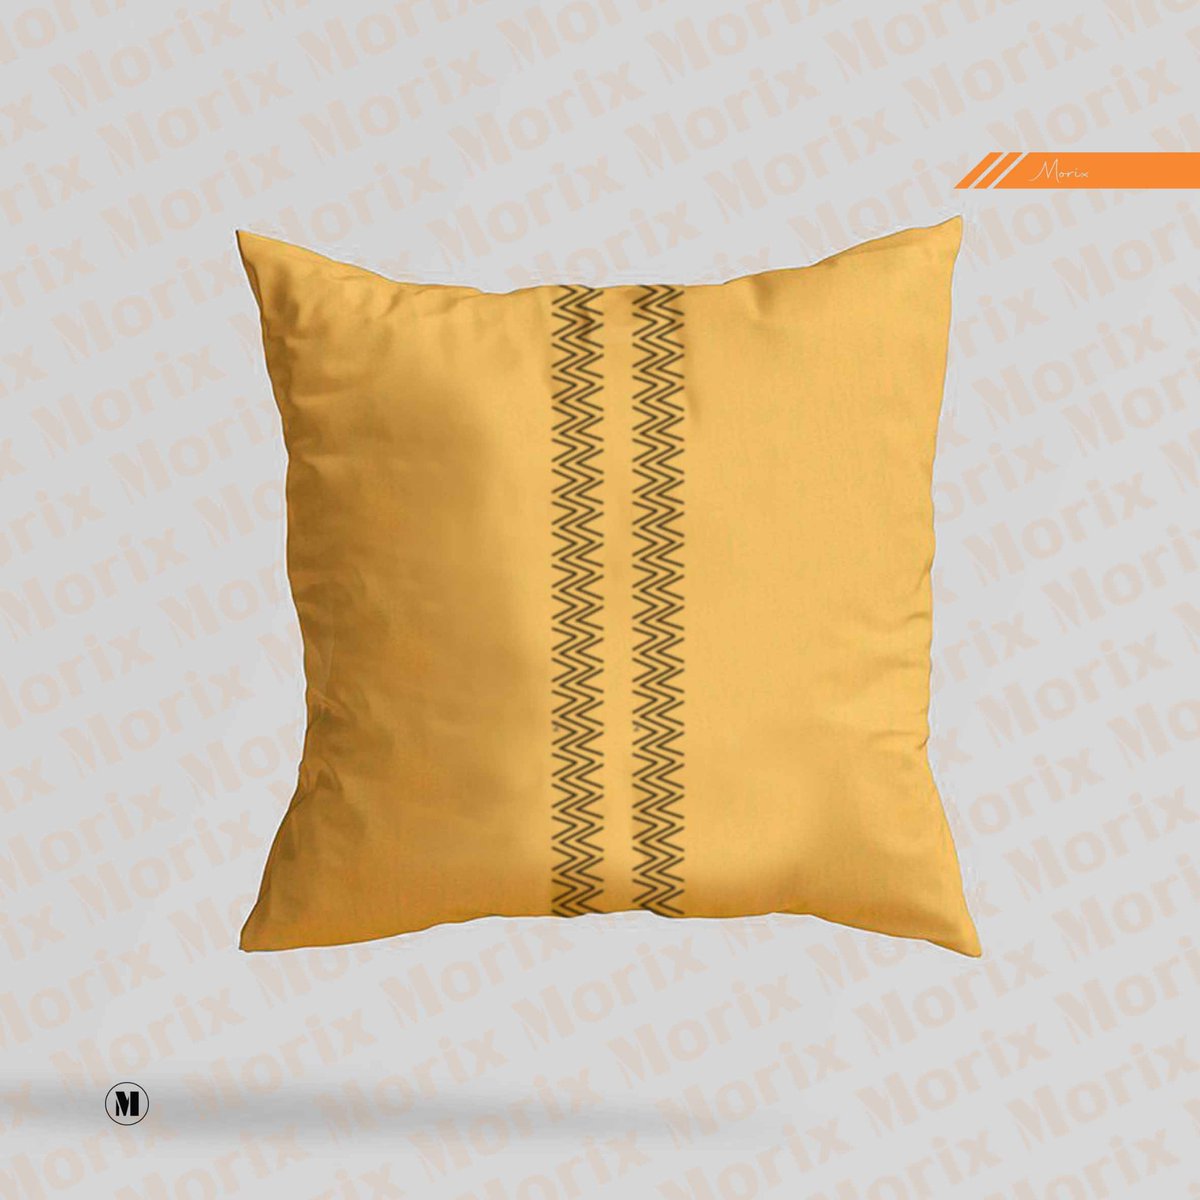 Let us know if you need a good pillow which is comfortable to give you a good night's sleep without any struggles of pain or ache!

......................... 
#printondemand #screeprinting #africanprint #tshirts #hoodie #cushions #decorativepillows #canvasbags #fabric4rlifestyle